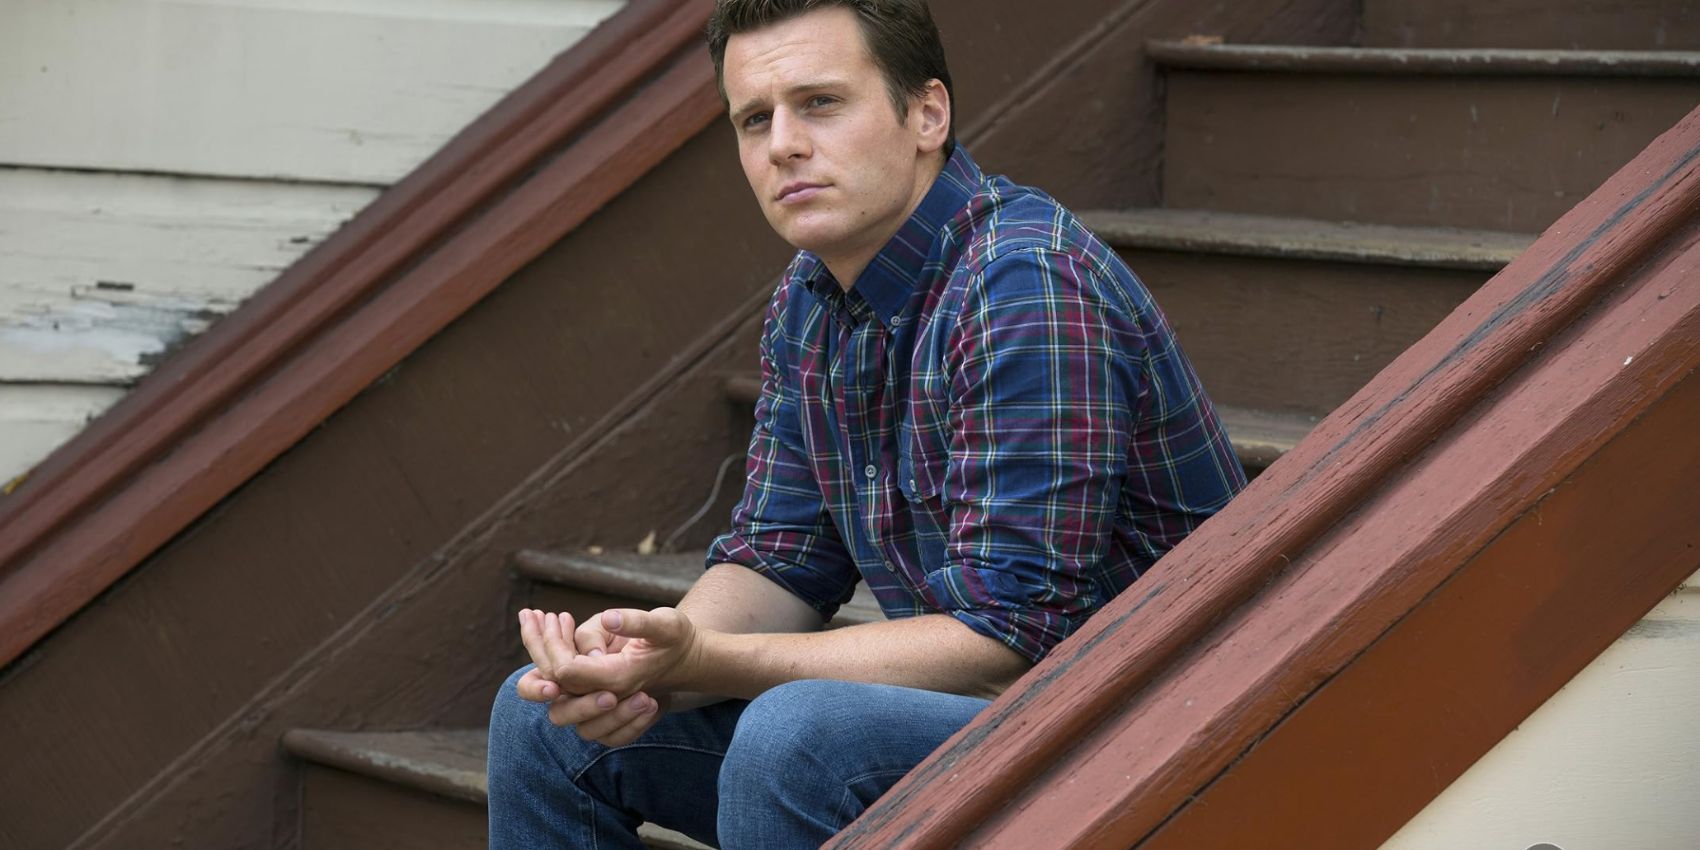 Jonathan Groff in Looking sitting on stoop with serious expression